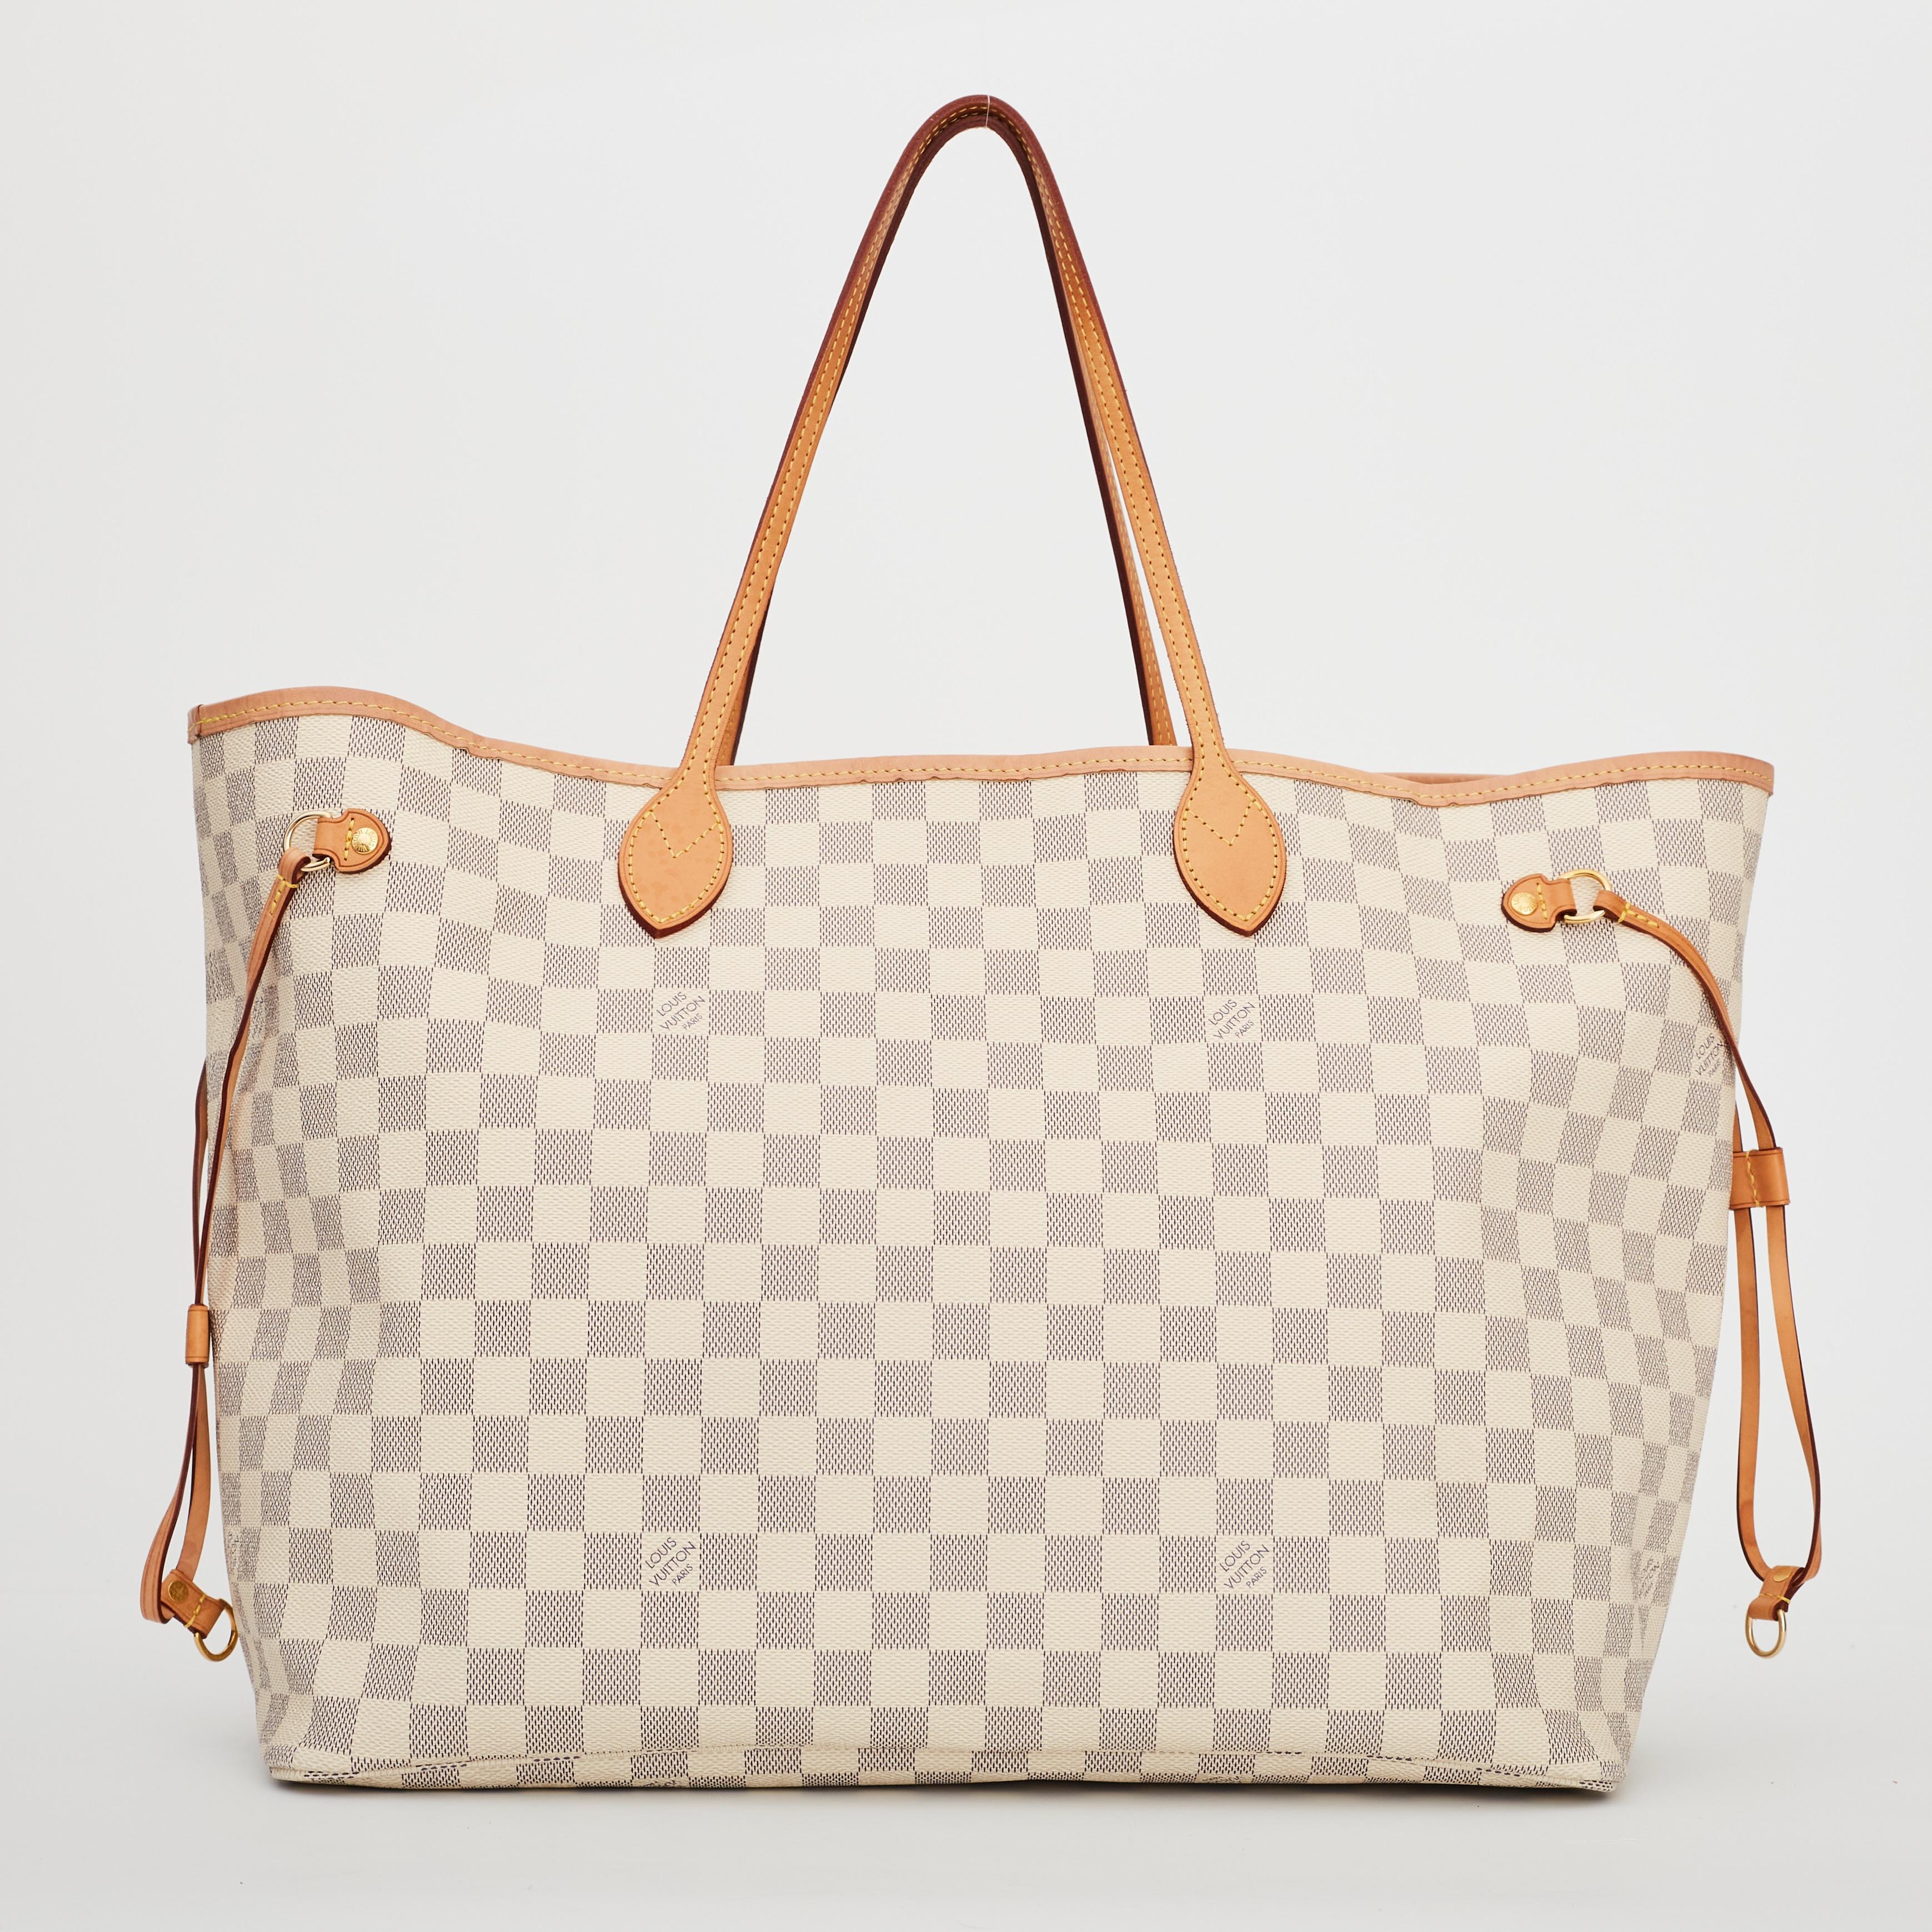 Authentic Louis Vuitton Neverfull GM Tote Damier Ebene Proof of